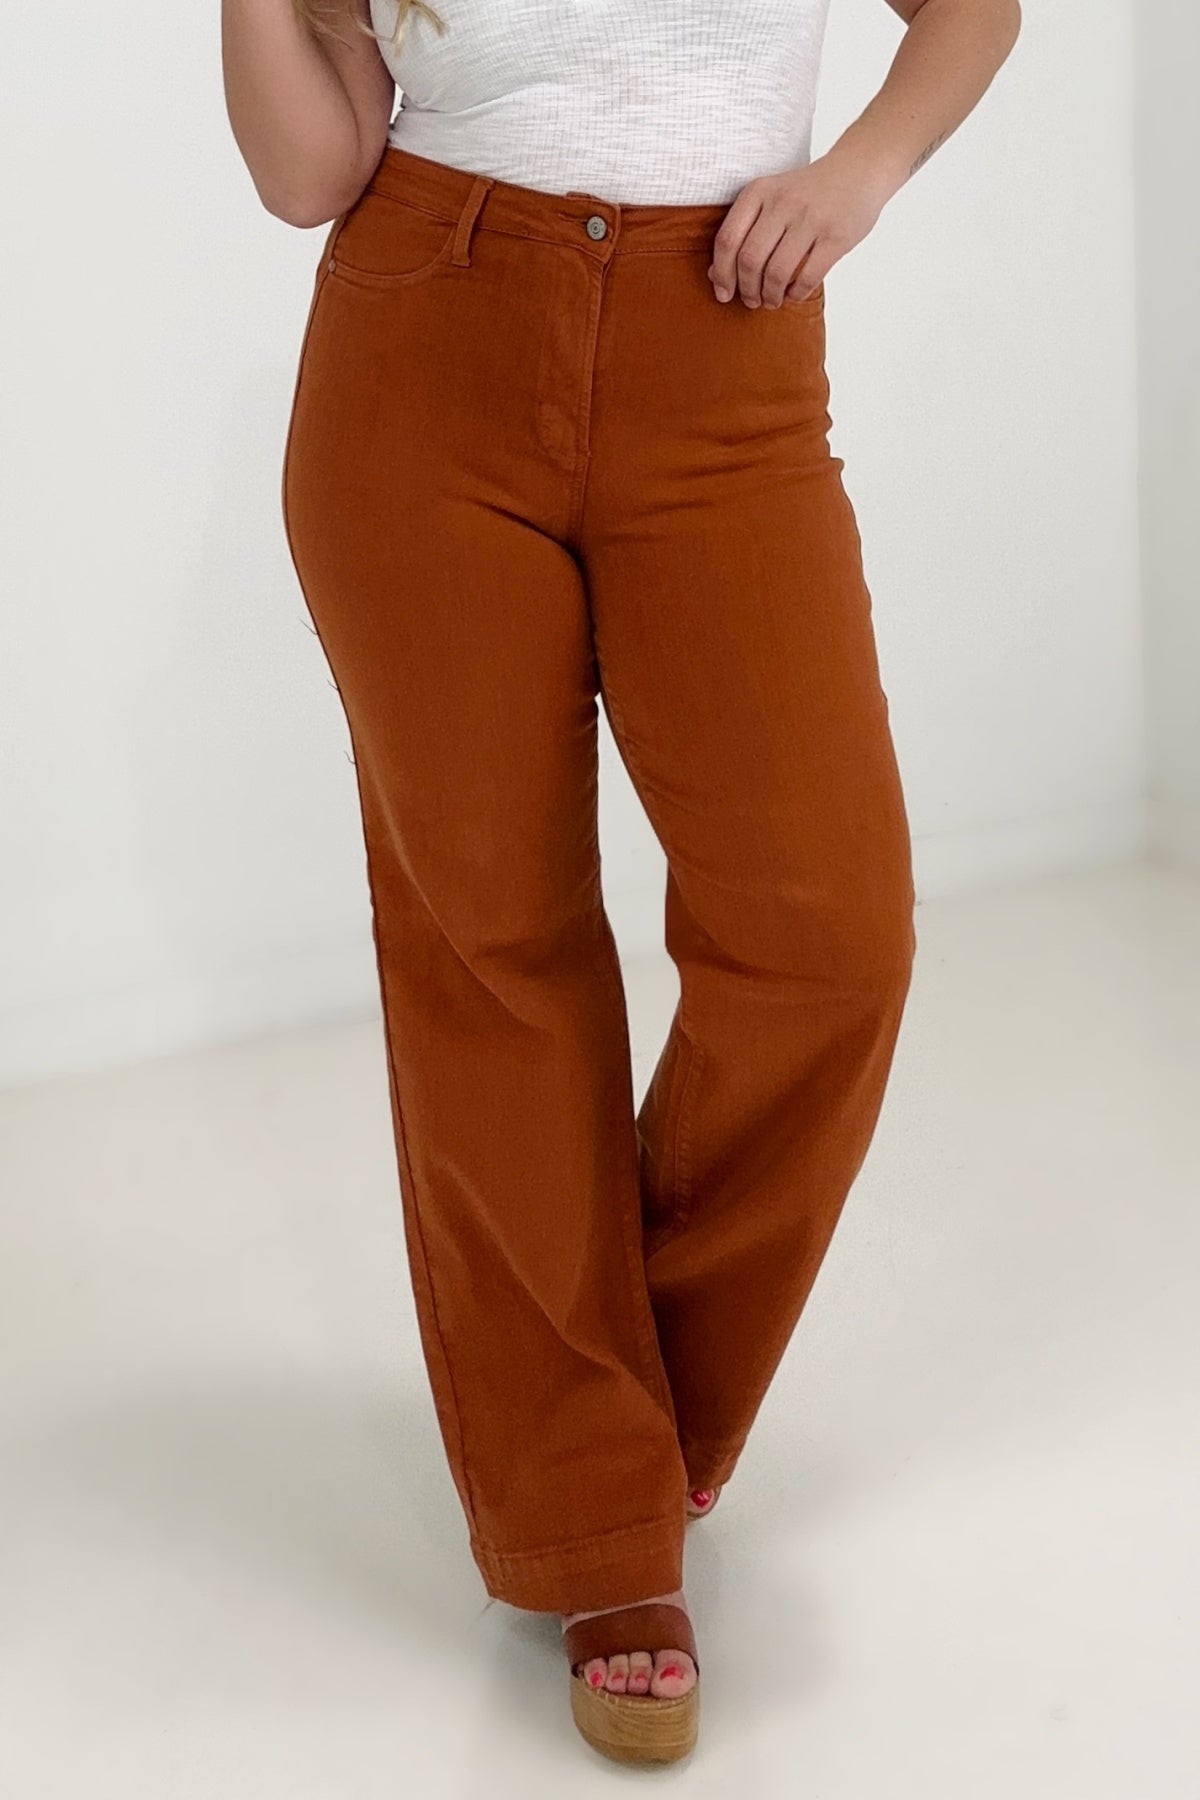 - Judy Blue High Waist Garment Dyed Wide Leg Jeans - Ships from The US - womens jeans at TFC&H Co.